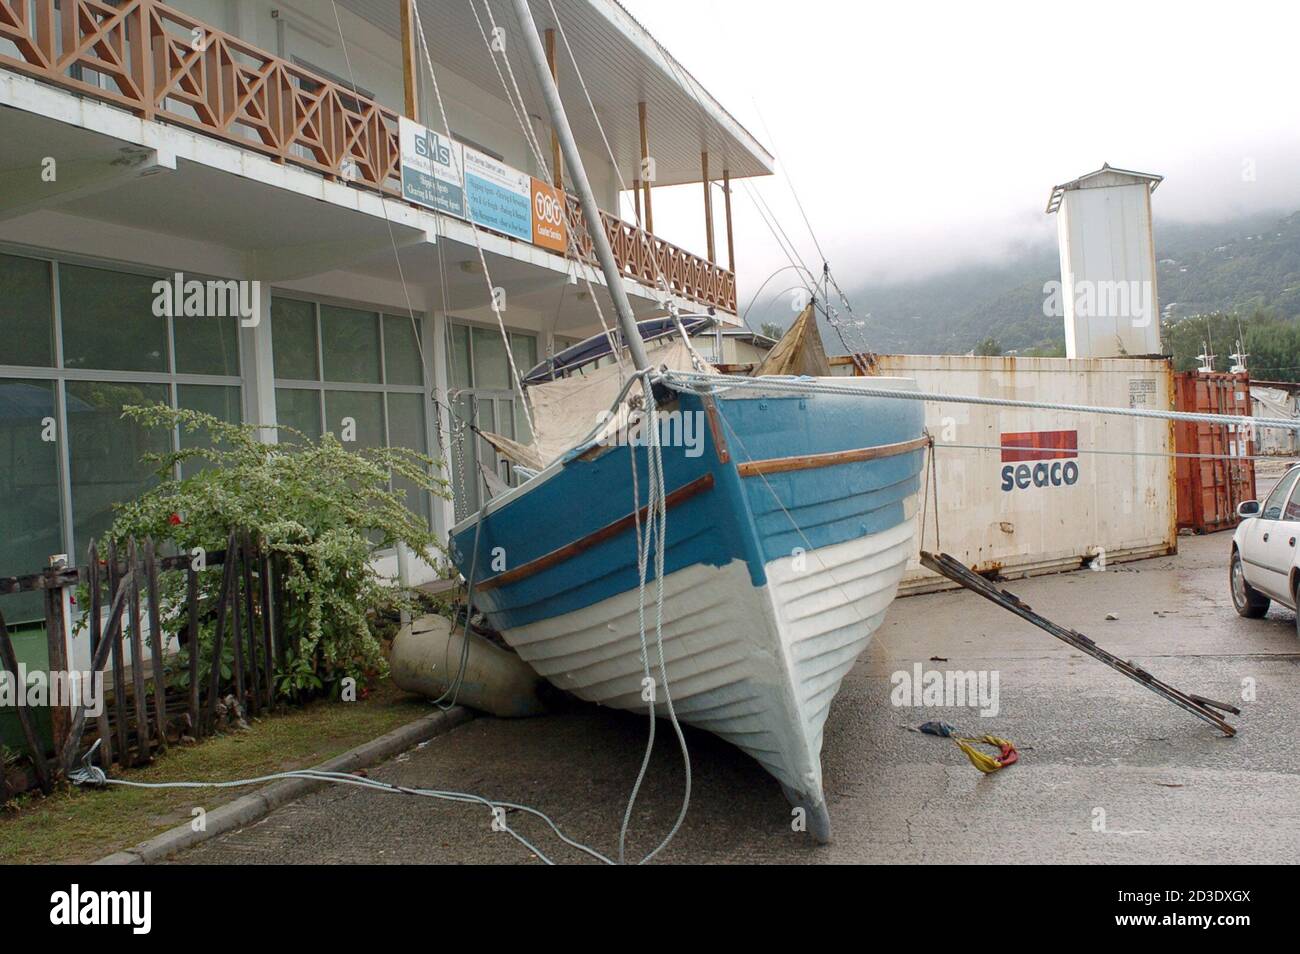 A boat lies in a road in Victoria town, Mahe Island in the Seychelles after an earthquake off Sumatra sent tsunami waves across the Indian ocean.  A boat lies in a road in Victoria town, Mahe Island in the Seychelles, following surges in the water level after an earthquake off the Indonesian island of Sumatra sent devastating tsunami waves across the Indian ocean on Sunday, in this photograph taken on December 27, 2004. Nations on the Indian Ocean from Indonesia to Sri Lanka searched amongst the wreckage of a devastating tsunami for bodies to bury on Tuesday as fears grew the toll would far ex Stock Photo